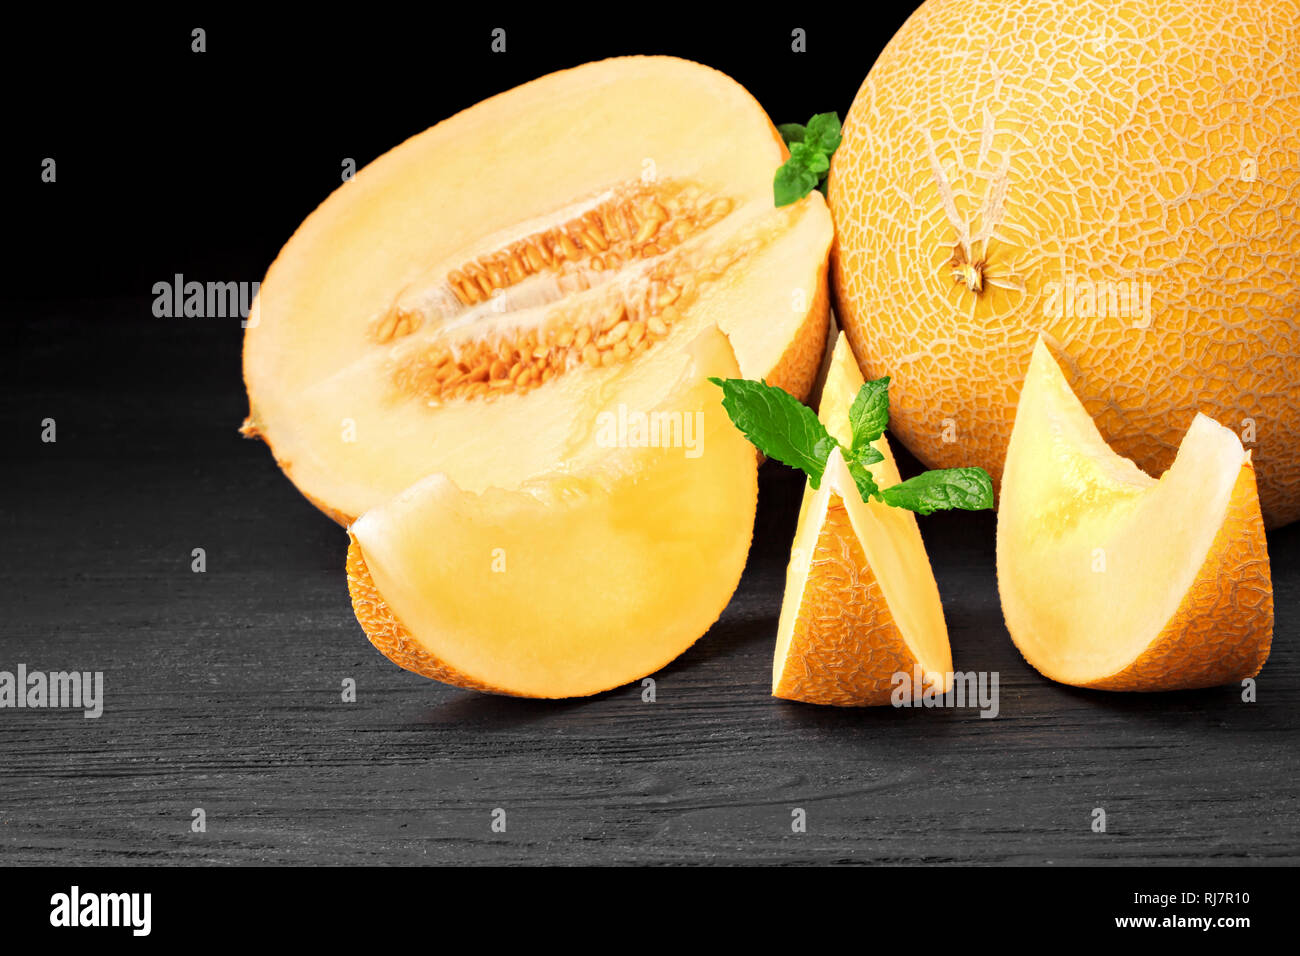 Large Bewitching Love Melons.three